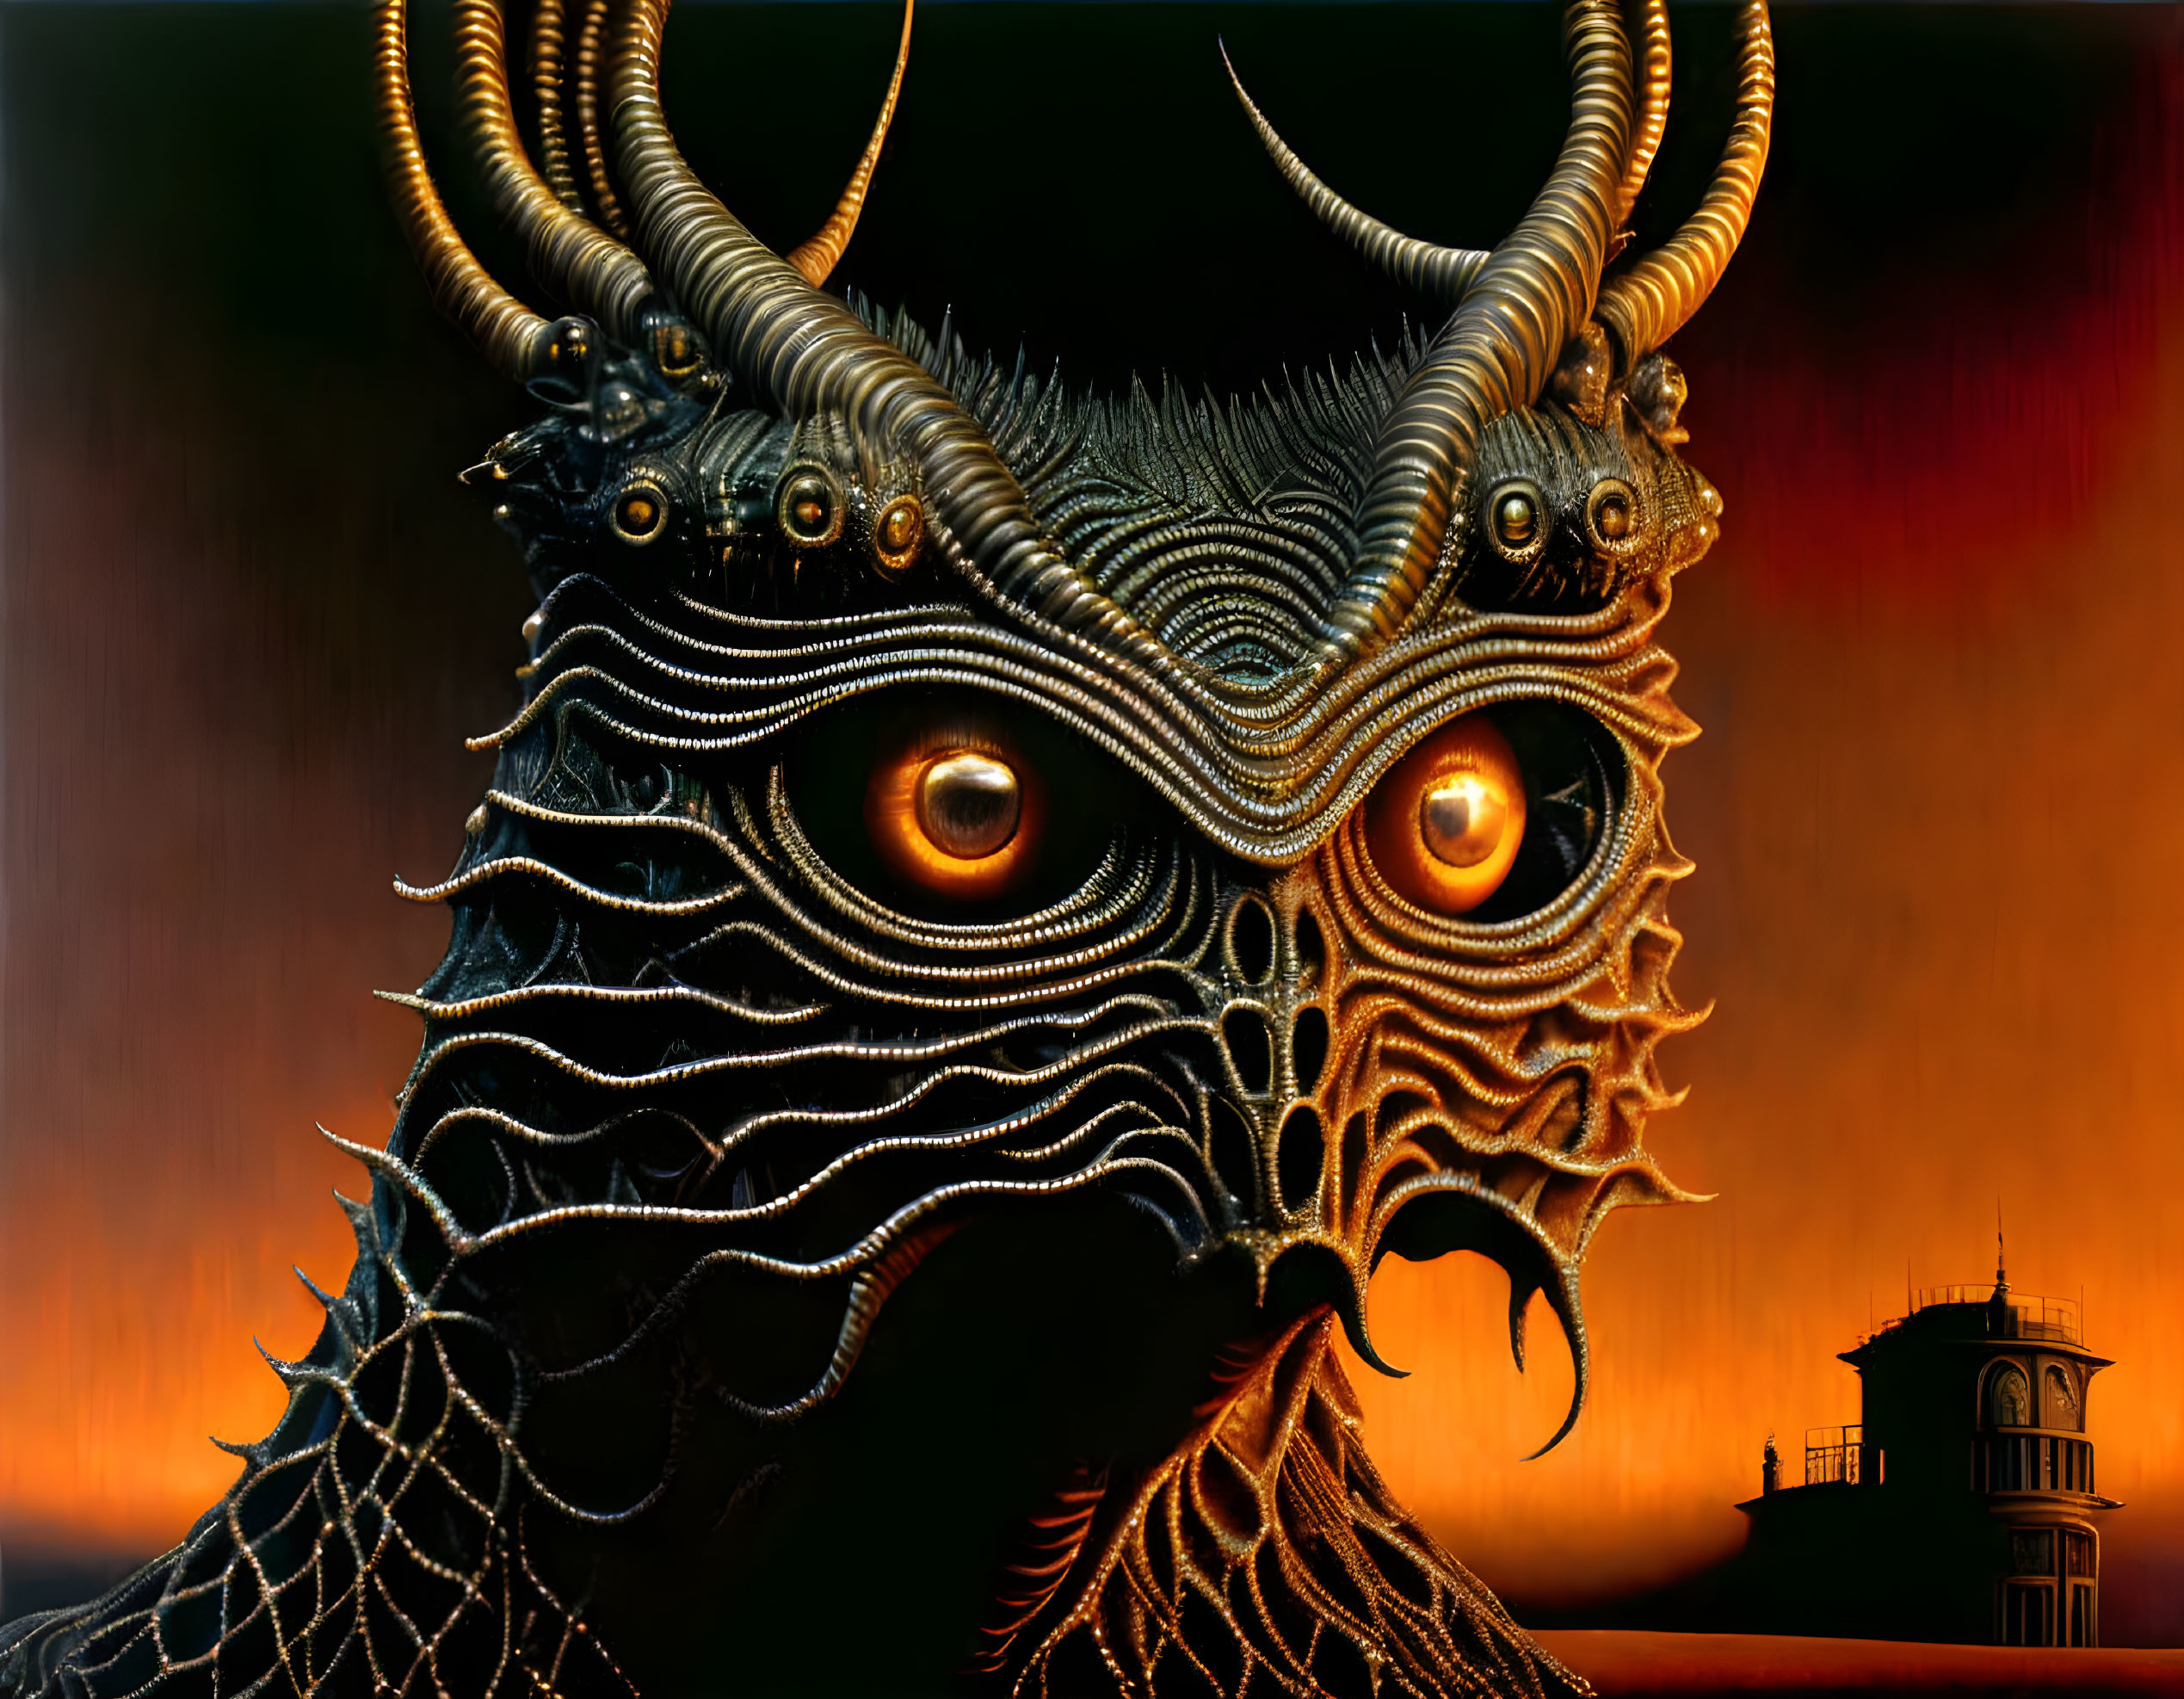 Majestic dragon-like creature with glowing eyes in front of red sky and building silhouette